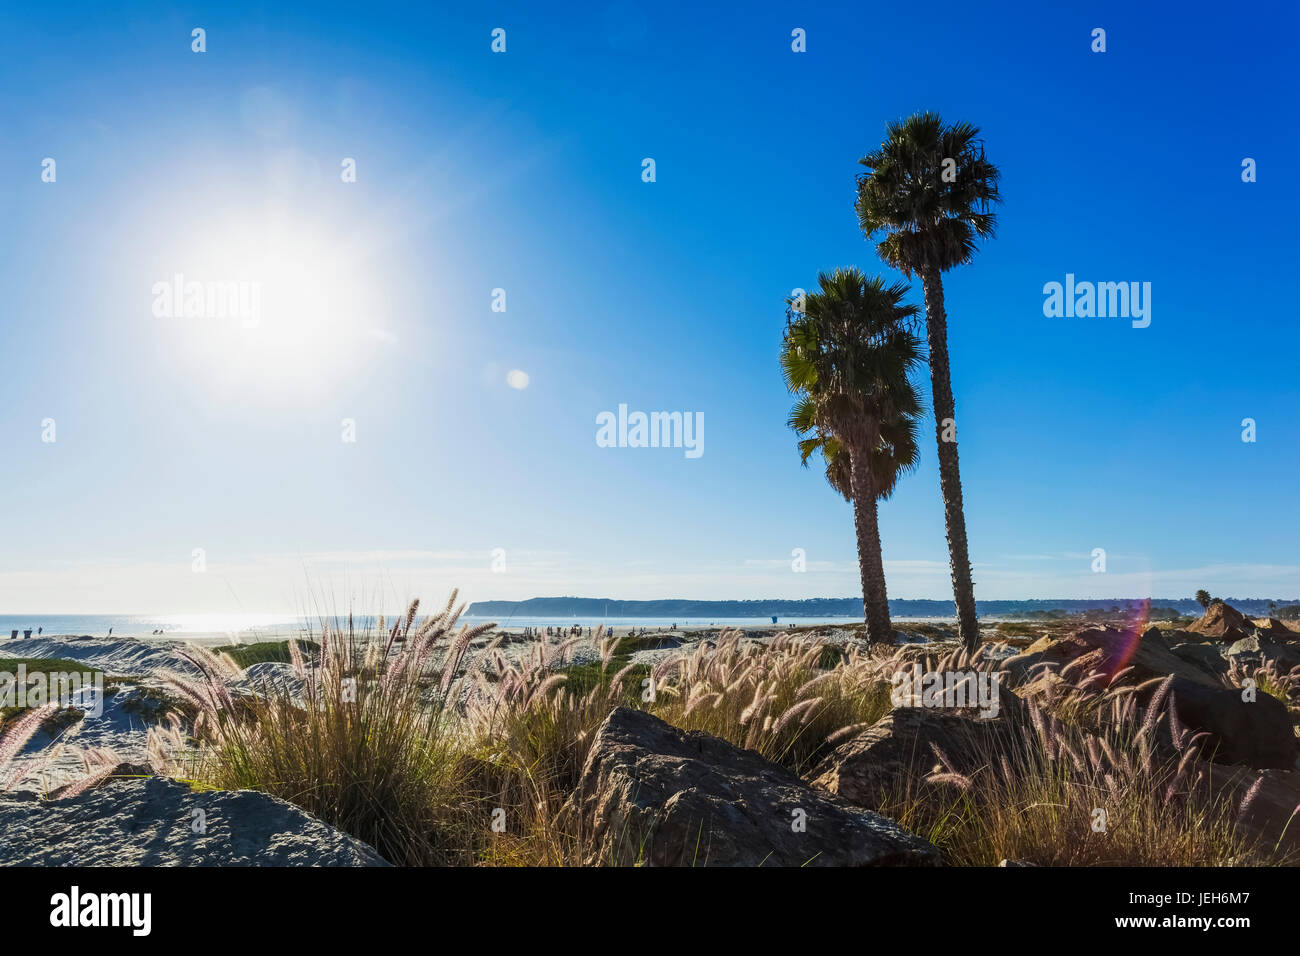 Palm trees on the shore along the coast with a view of the coastline under a blue sky; California, United States of America Stock Photo